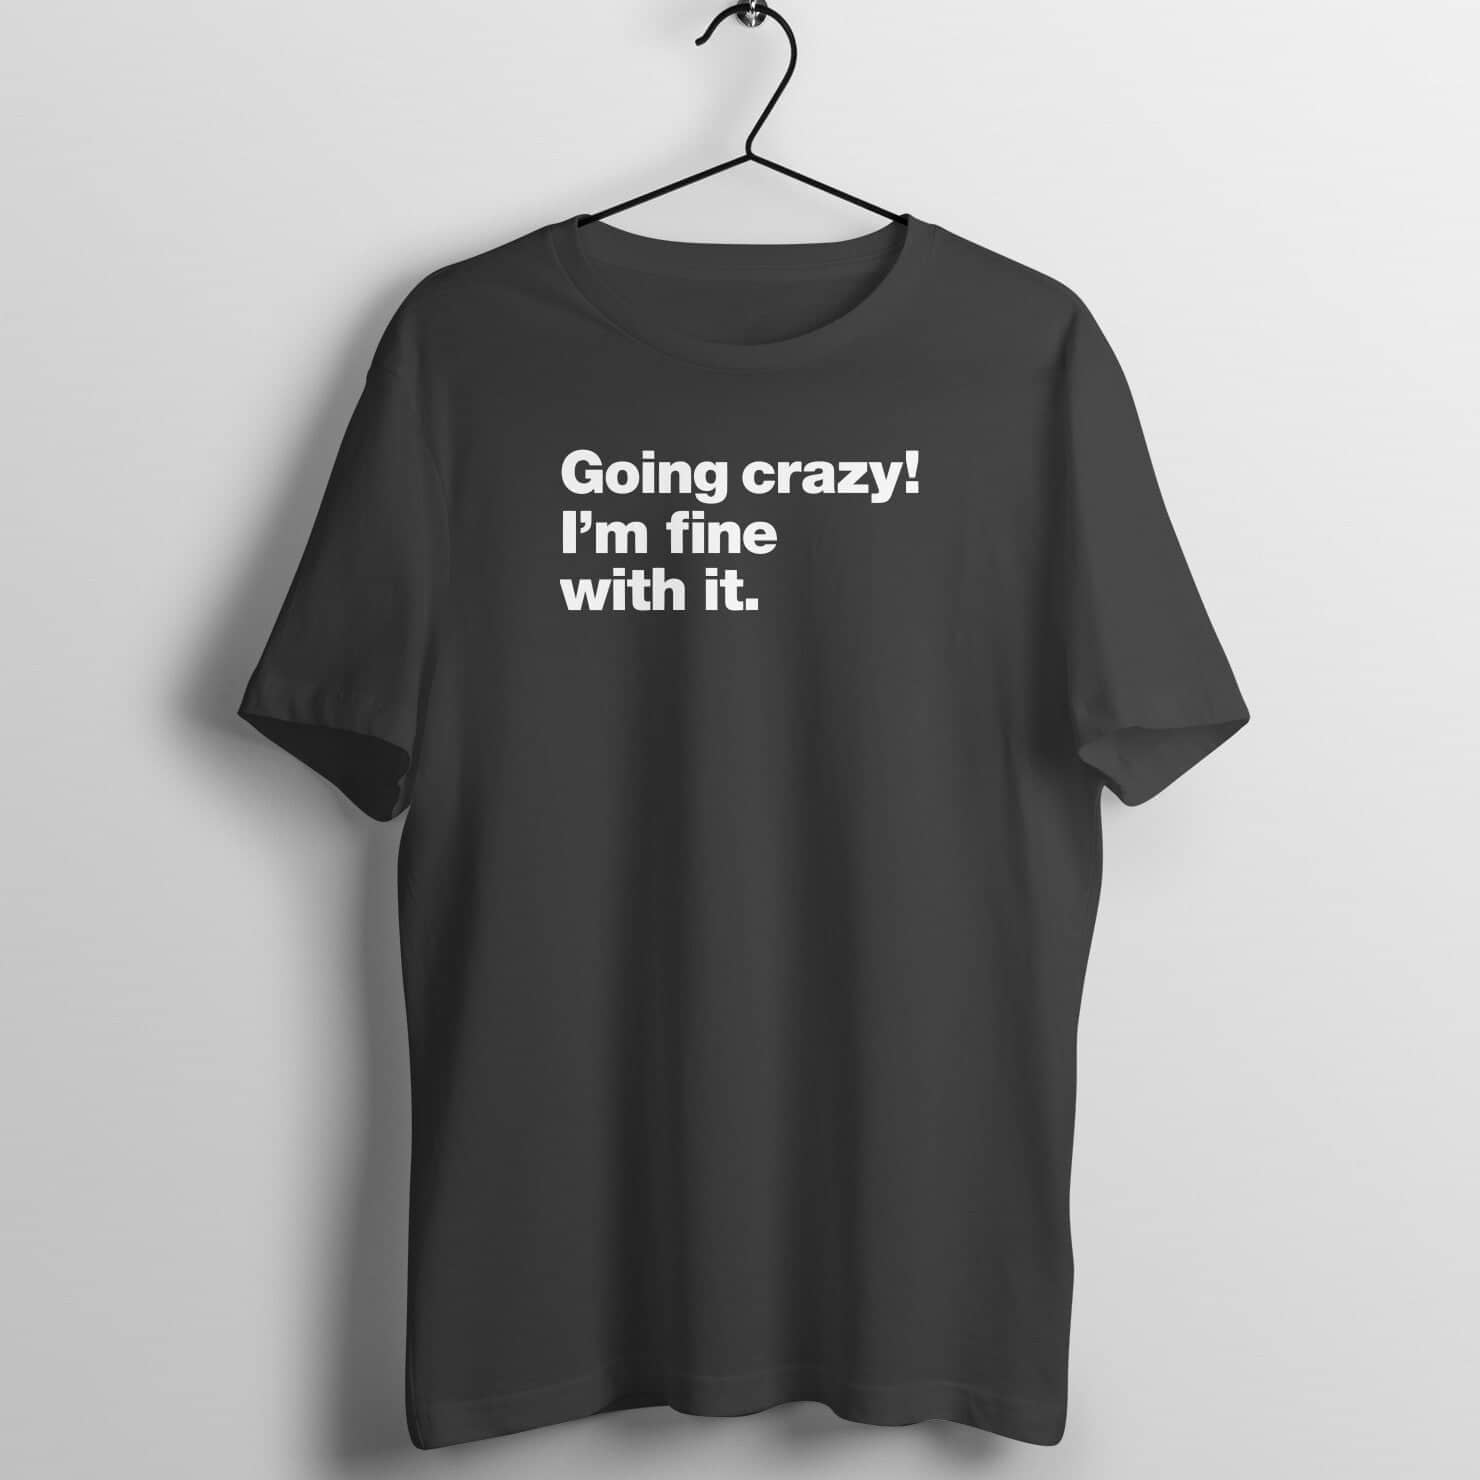 Going Crazy! I am Fine With It Exclusive Adventure Black T Shirt for Men and Women freeshipping - Catch My Drift India